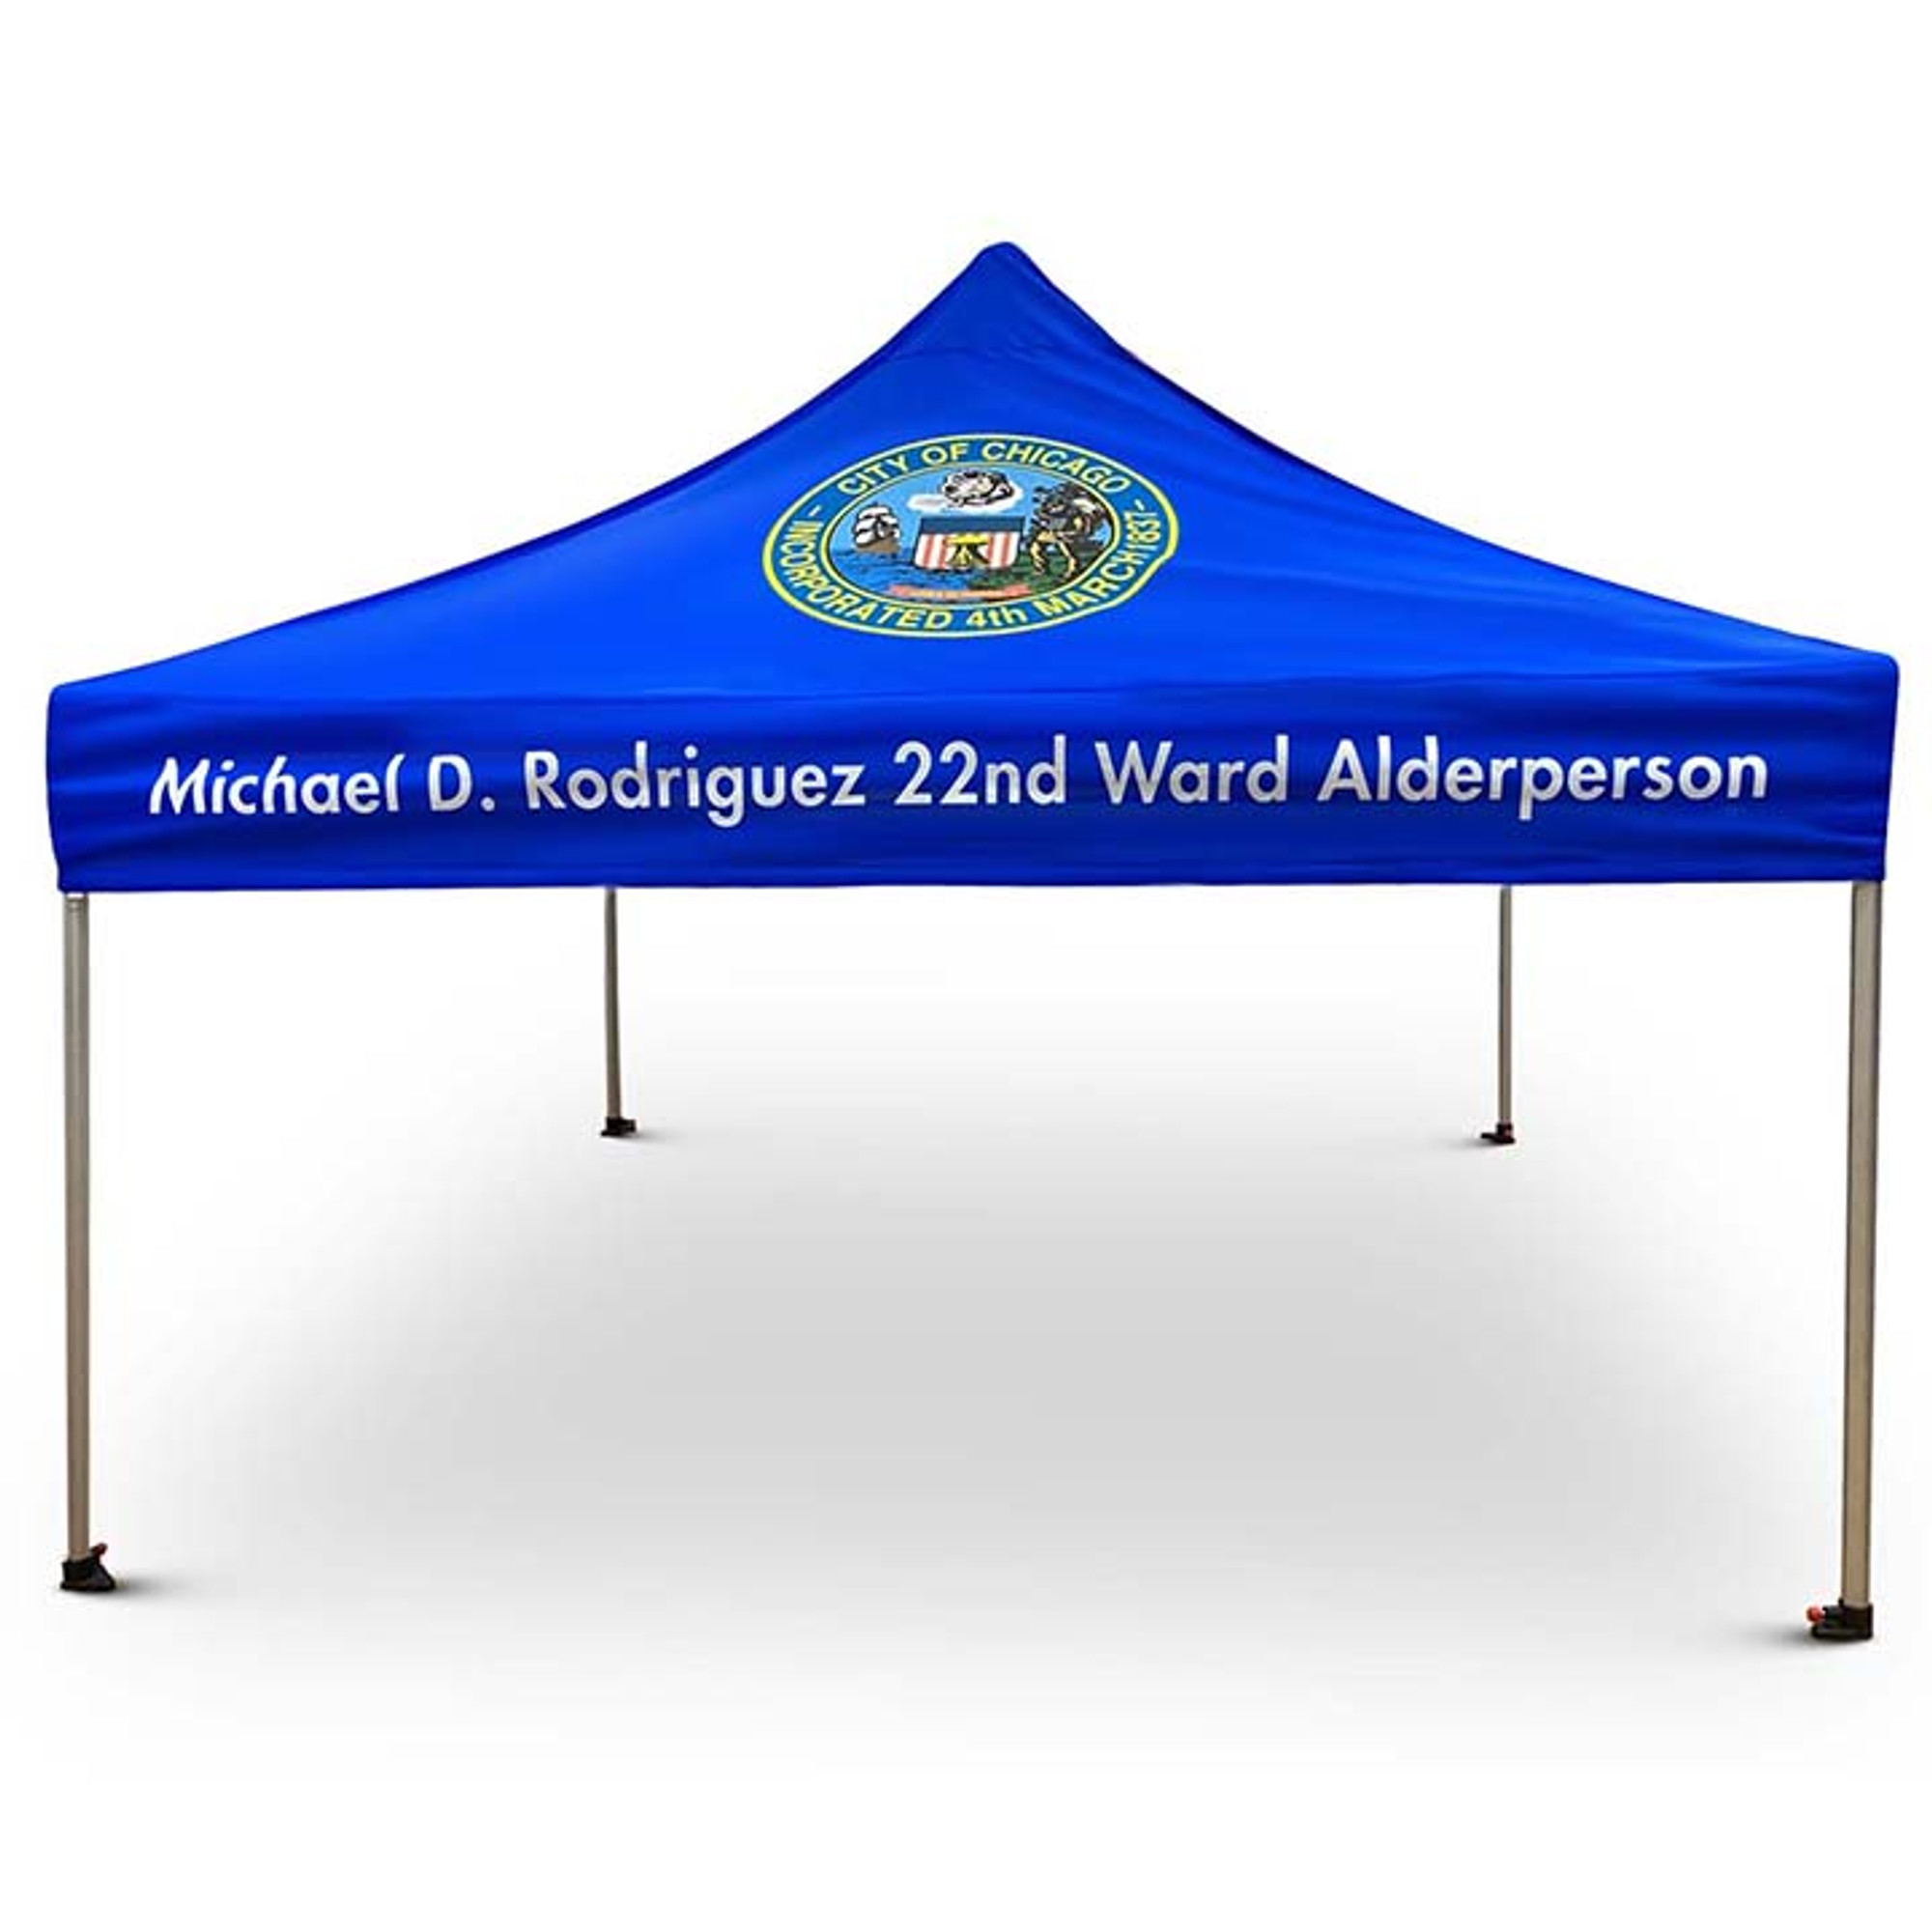 Shop for 10'x10' Custom Canopy Tent at Best Price